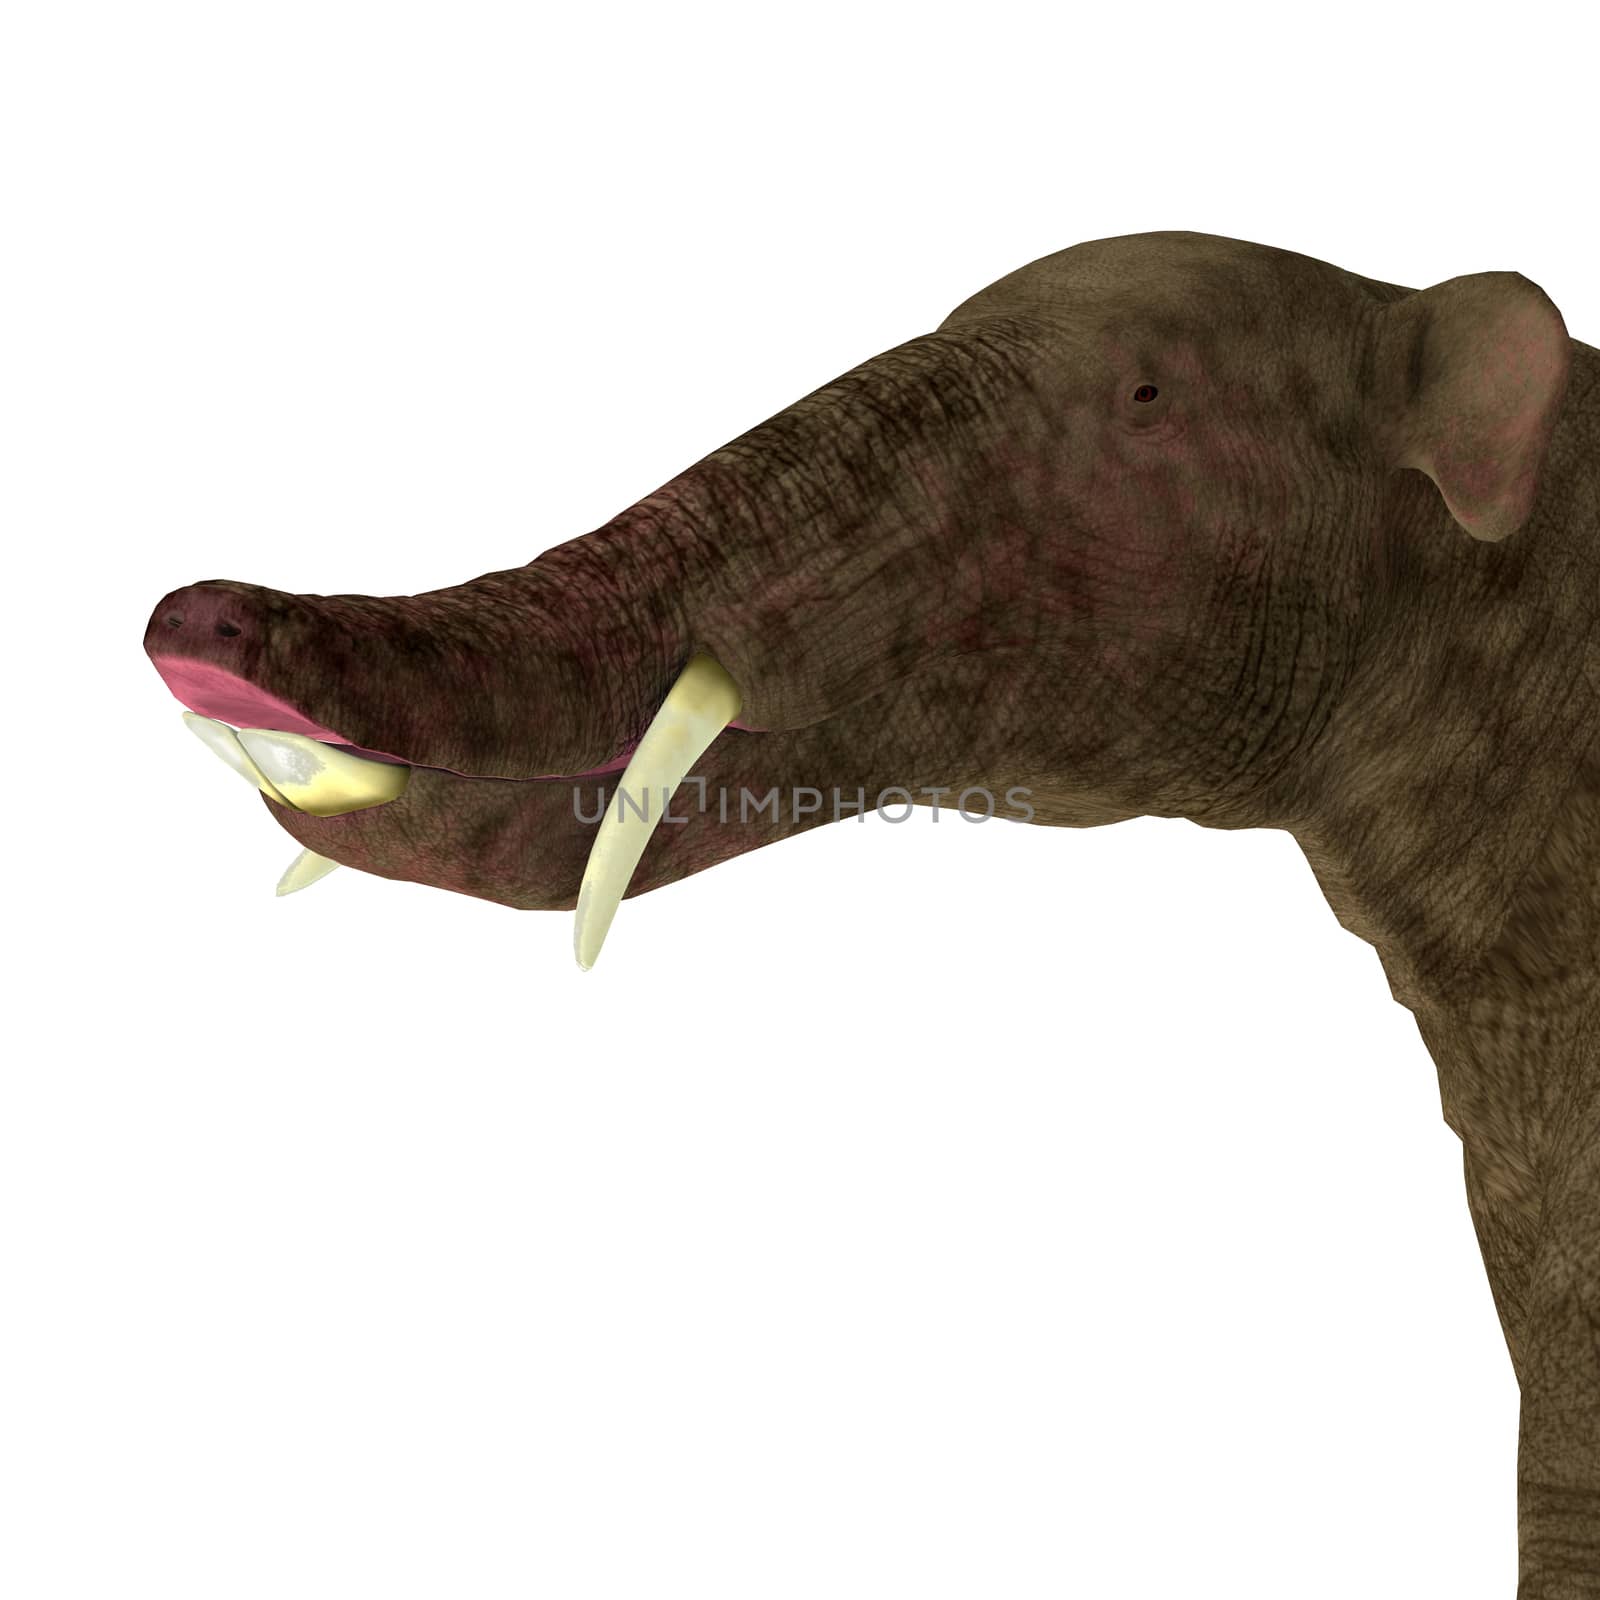 Platybelodon is an extinct herbivorous mammal related to the elephant that lived during the Miocene Period of Africa, Europe, Asia and North America. 